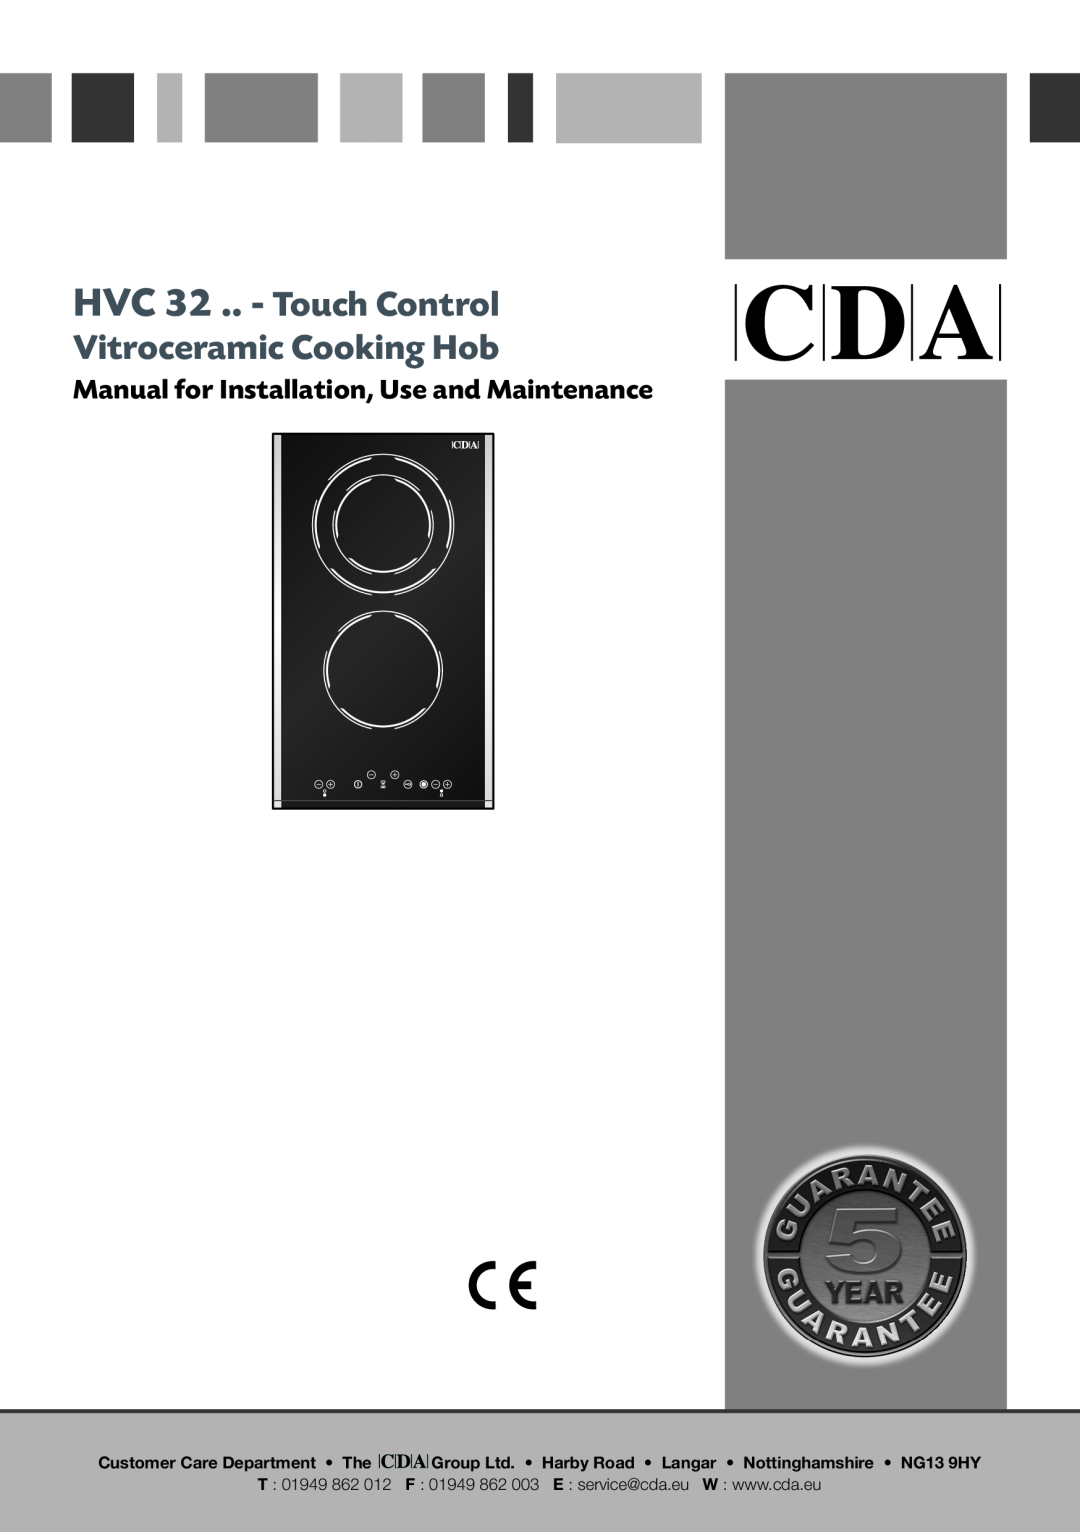 CDA manual HVC 32 .. - Touch Control Vitroceramic Cooking Hob, Manual for Installation, Use and Maintenance 